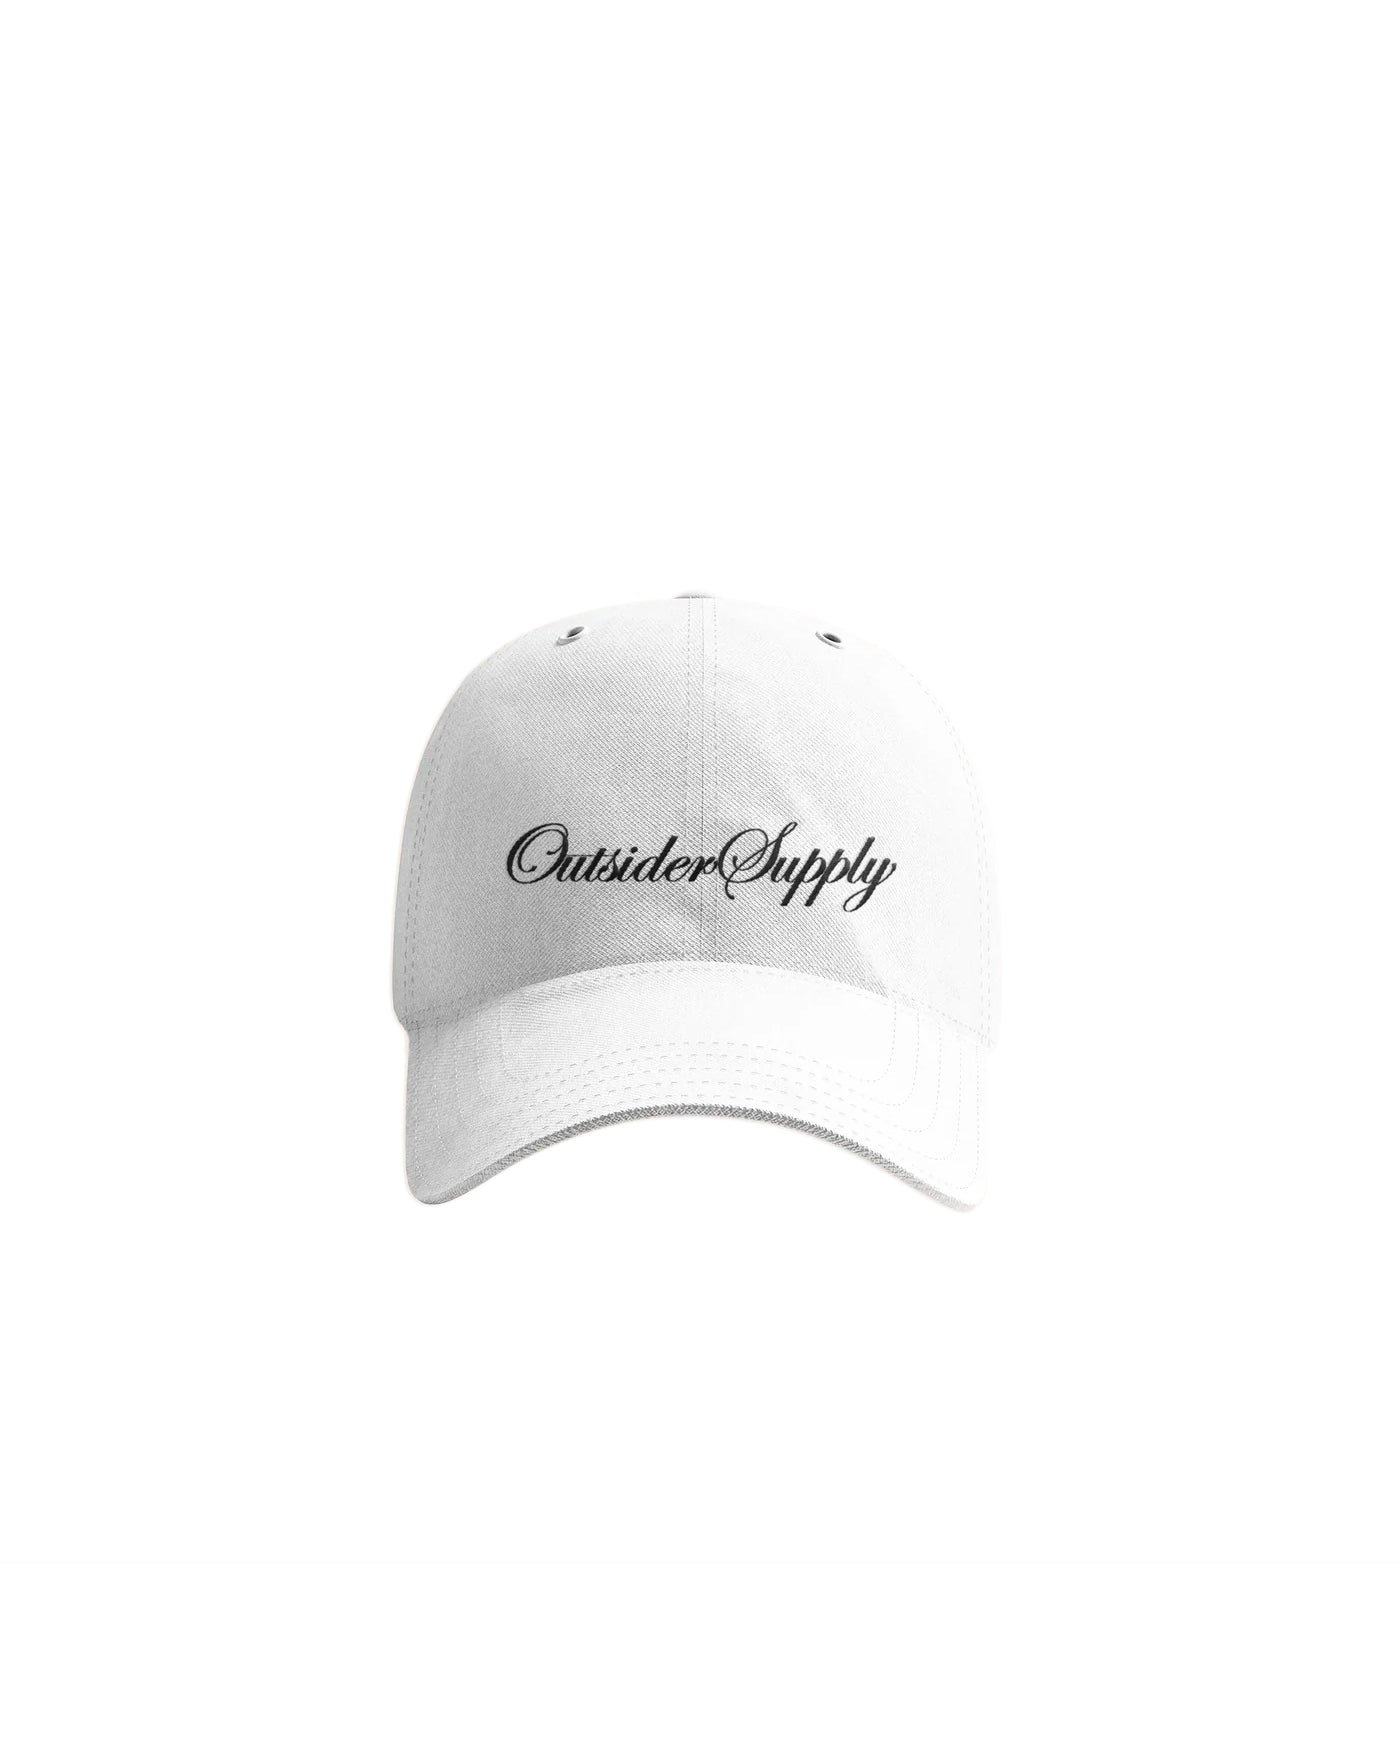 Outsider Supply Classic Dad Hat